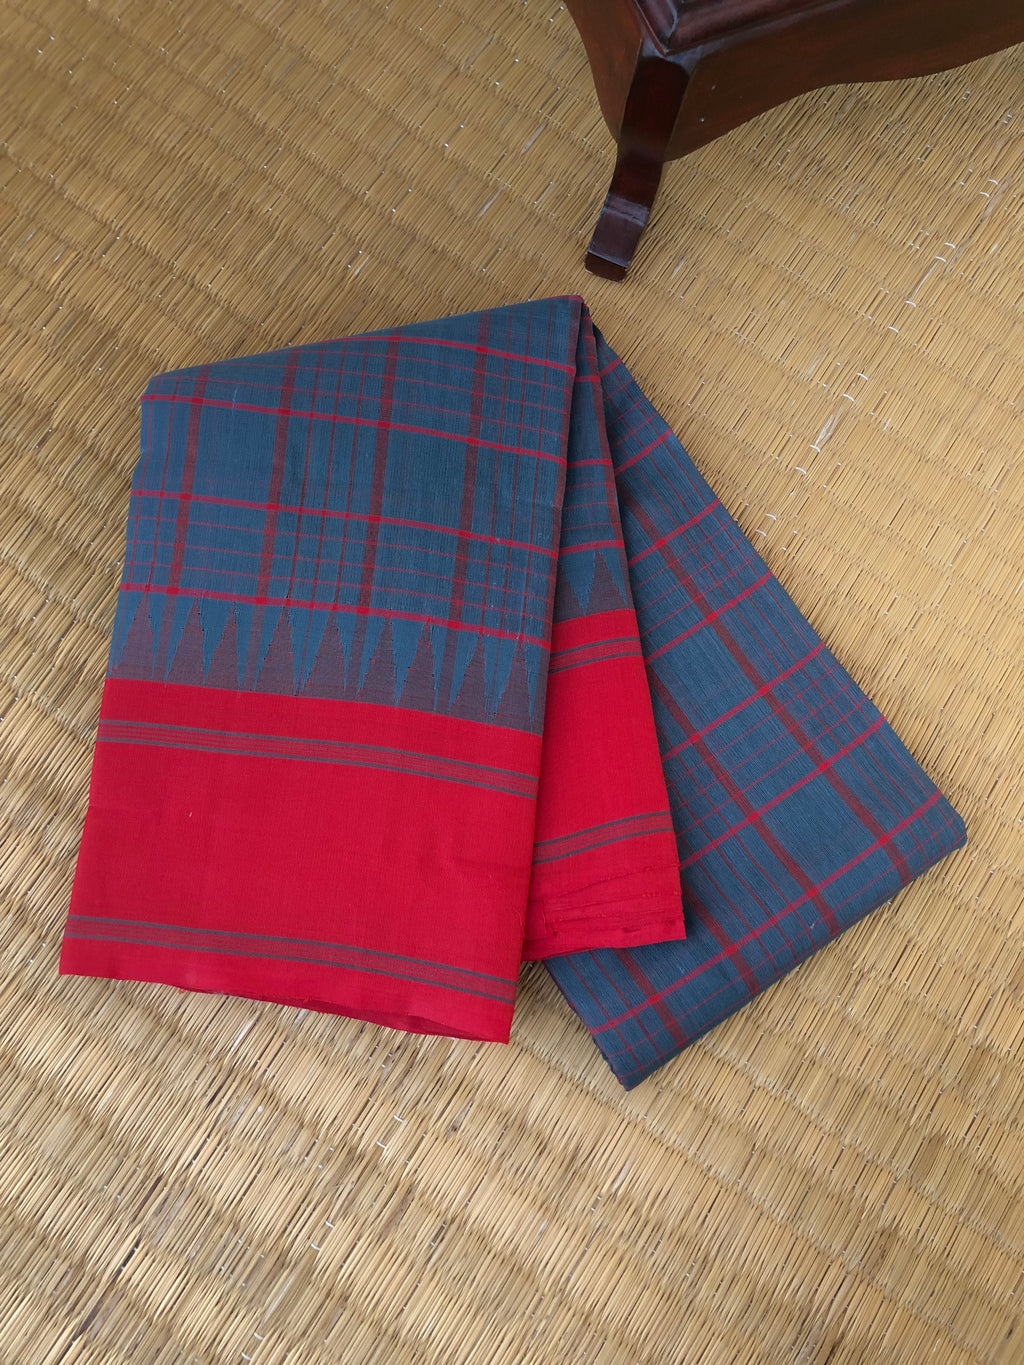 Signature Korvai Silk Cottons - deep elephant grey and red